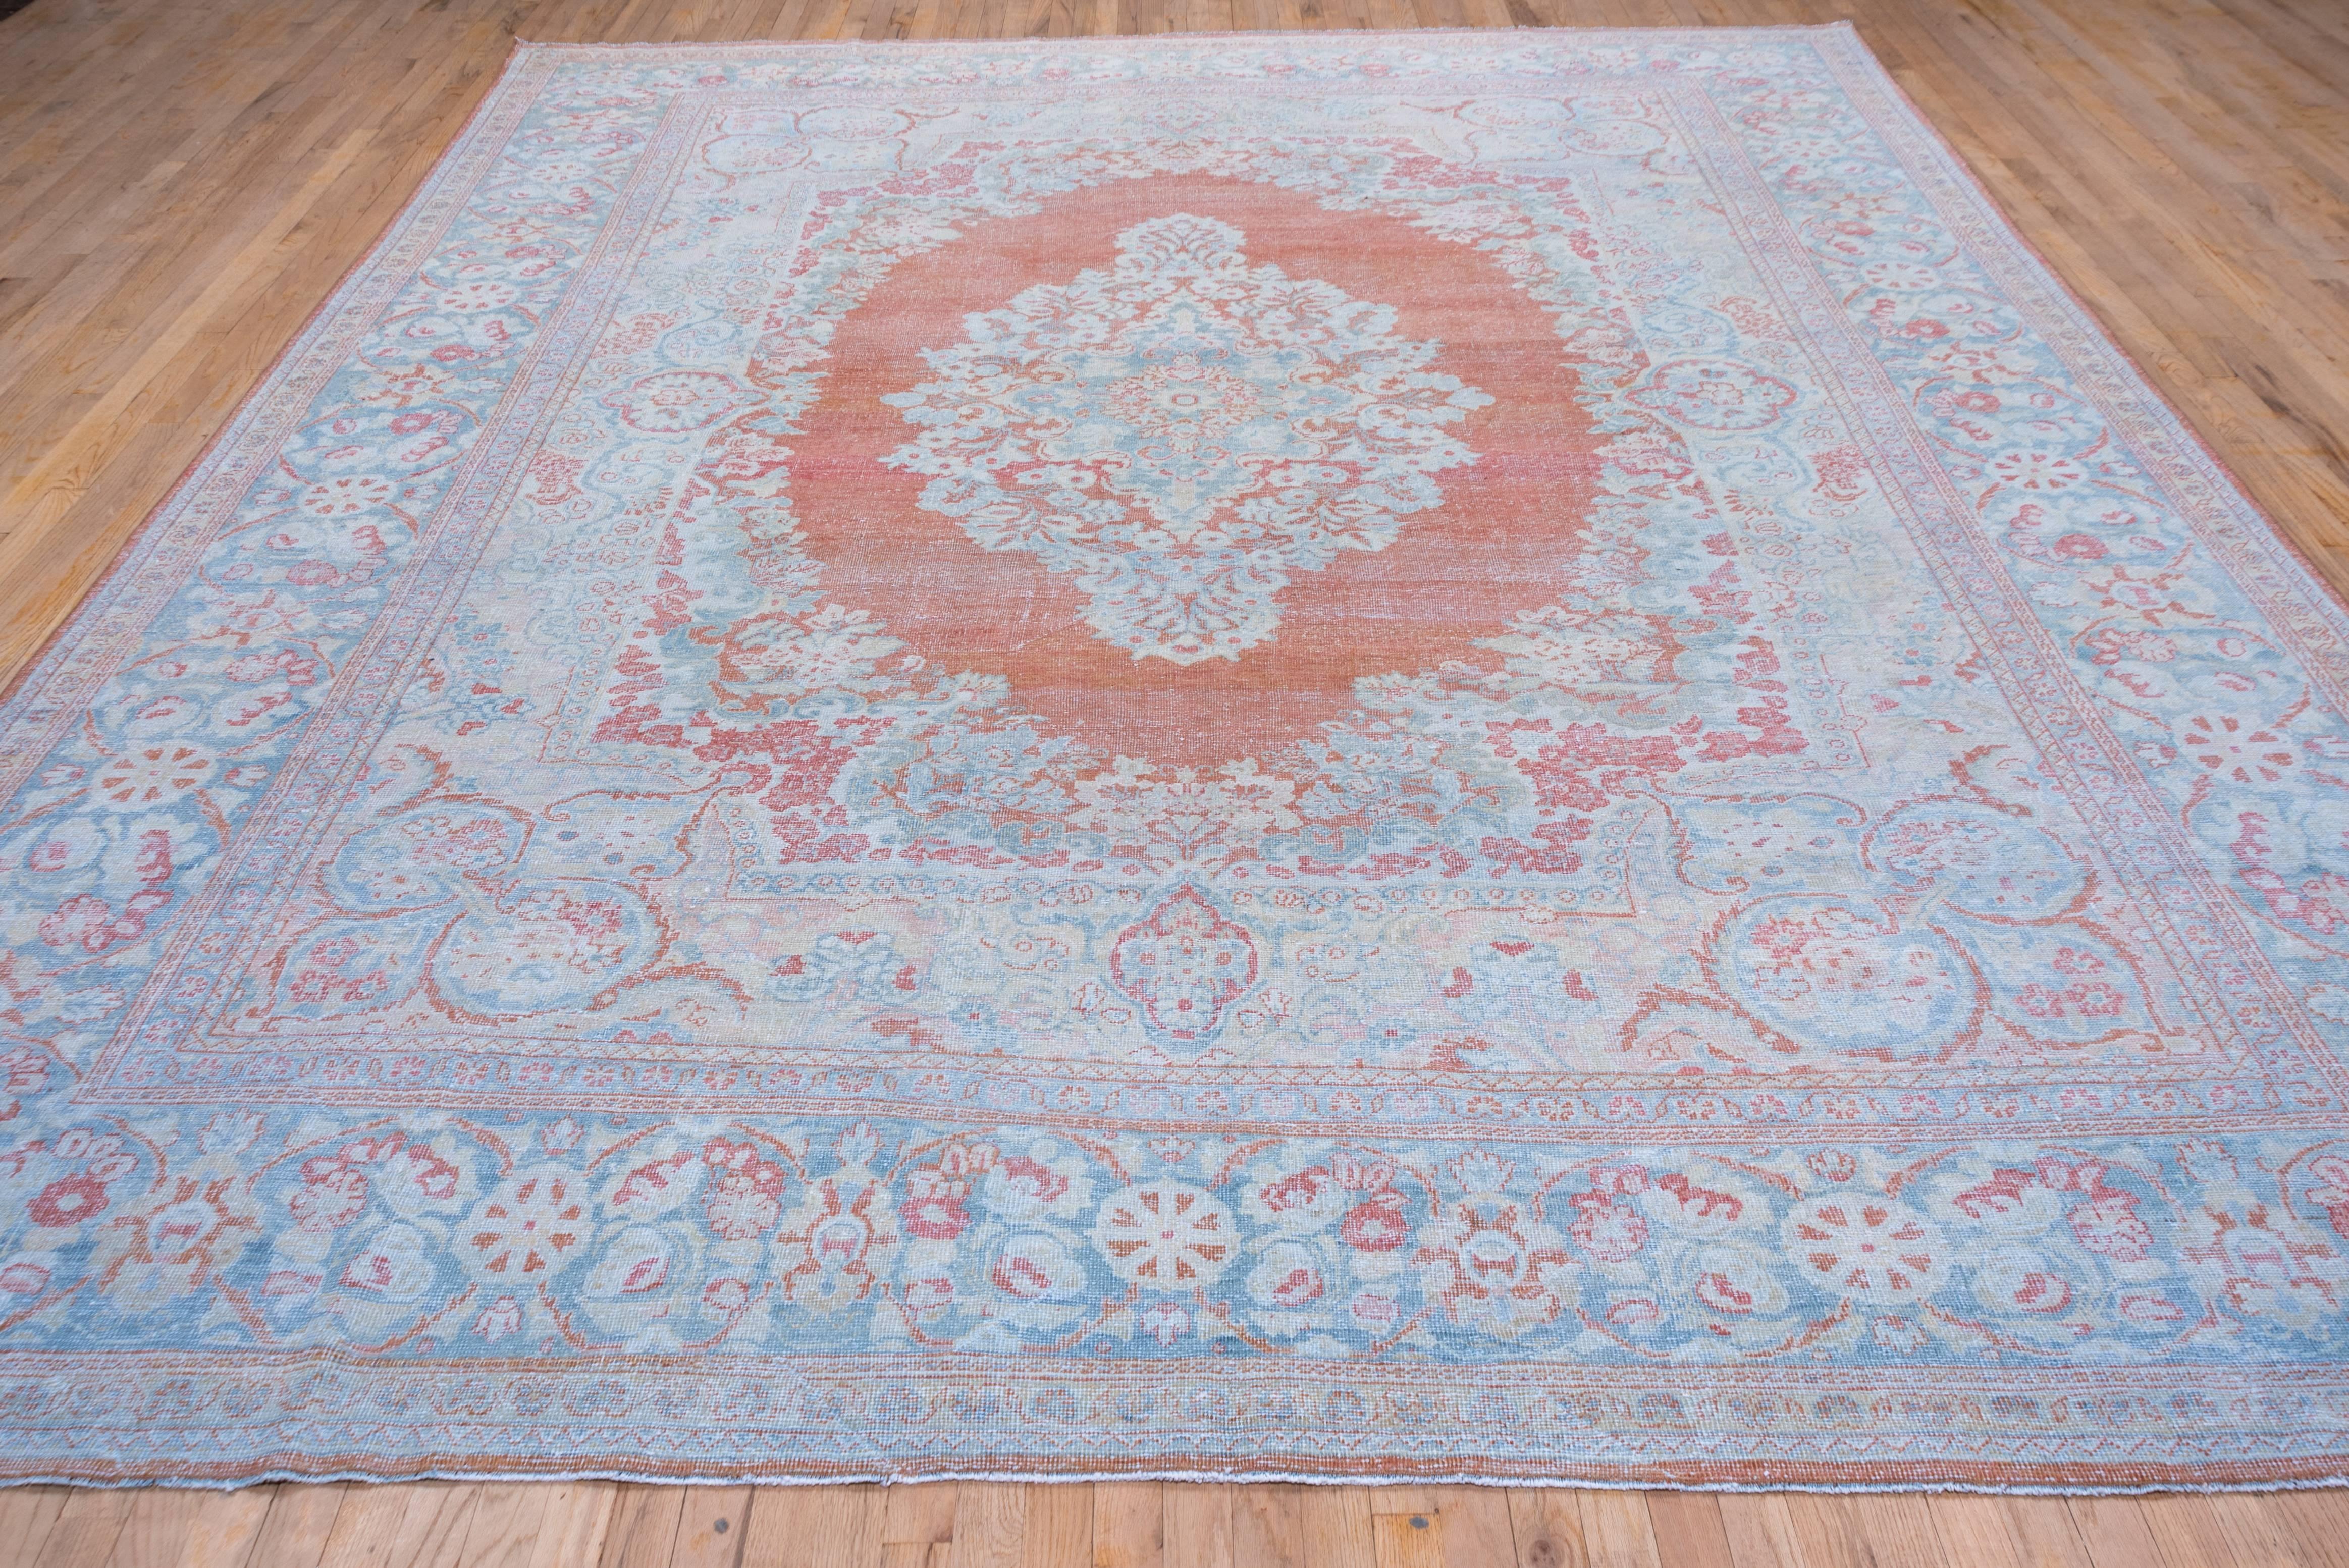 Persian Antique Mahal Rug, Oval Medallion